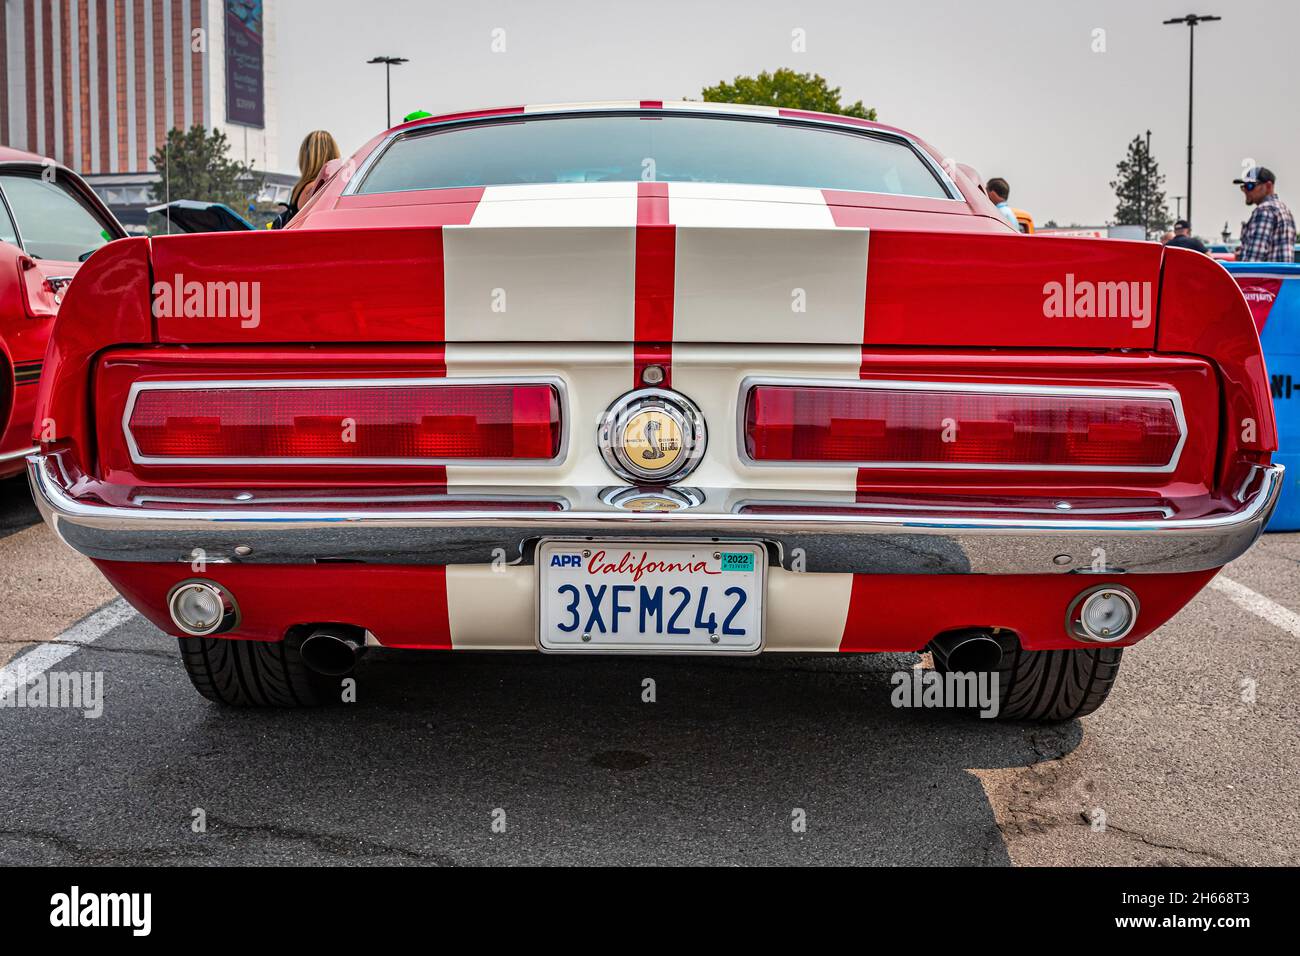 Reno, NV - August 6, 2021: 1967 Shelby Cobra GT500 fastback coupe at a local car show. Stock Photo